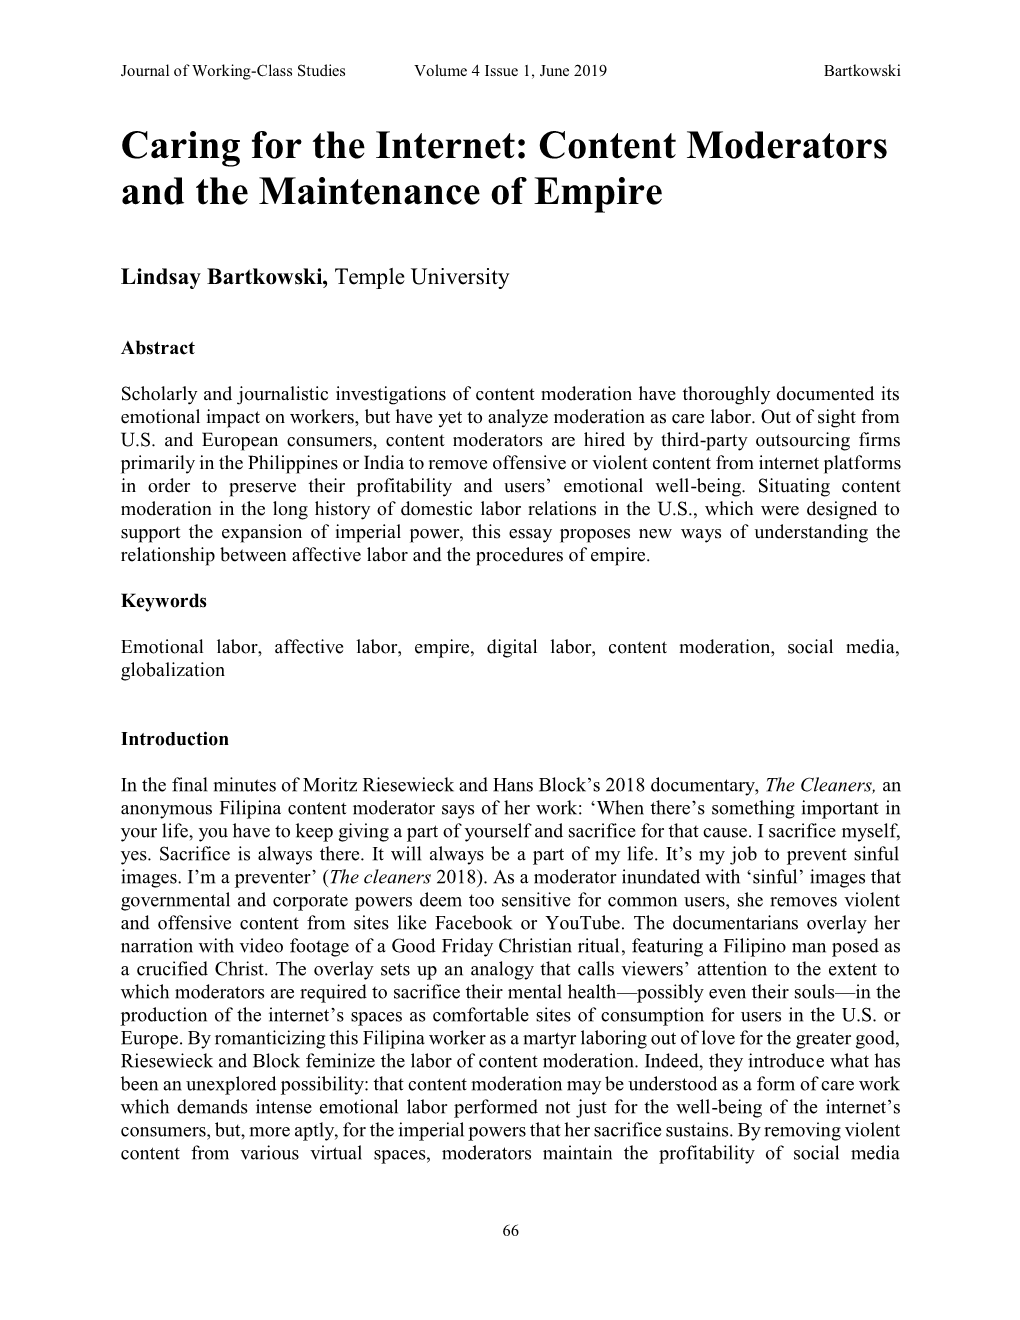 Content Moderators and the Maintenance of Empire